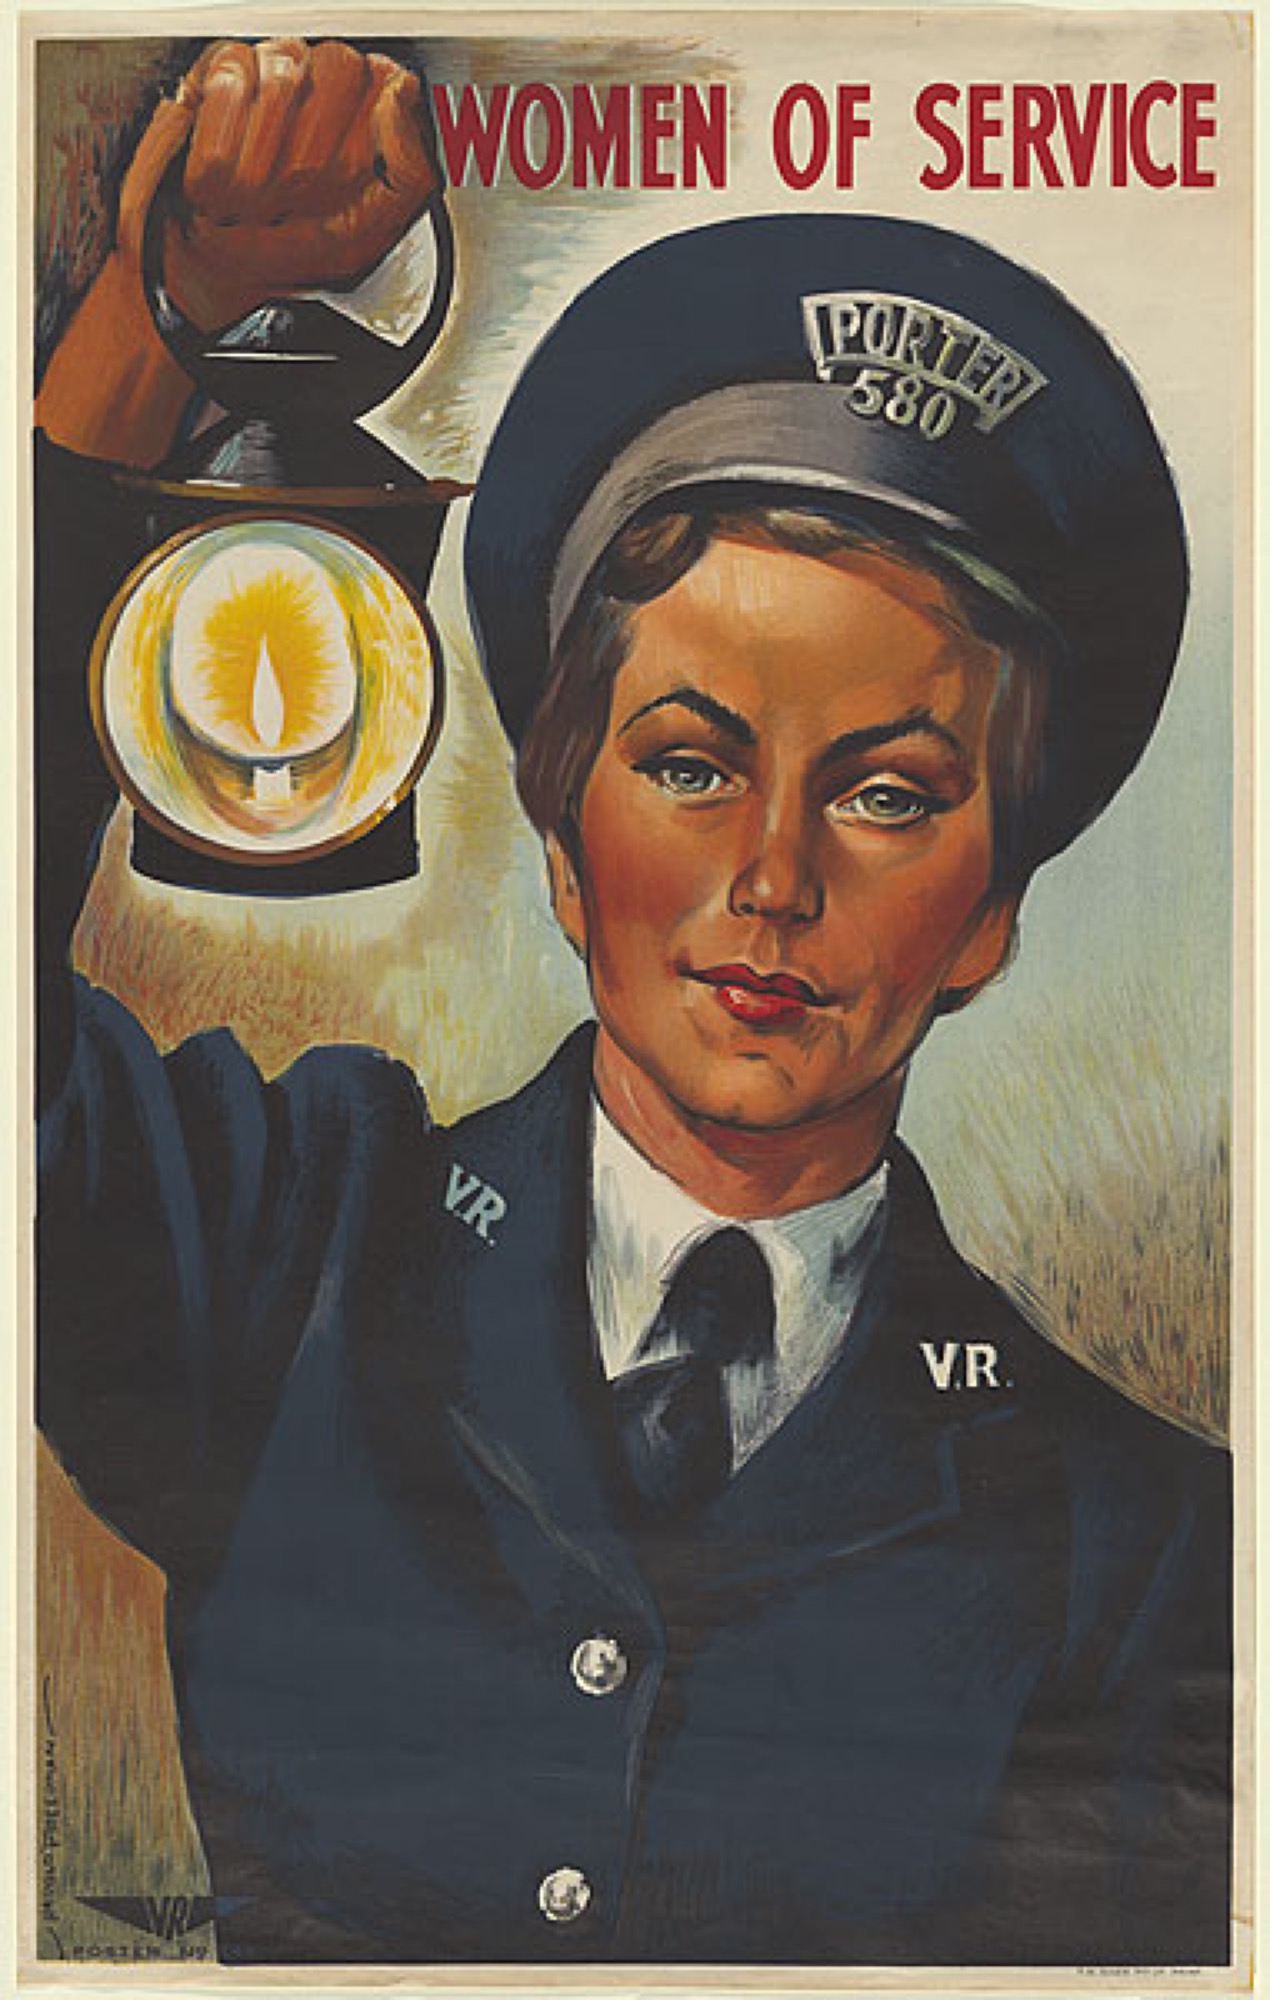 <em>Women of Service: The Porter</em>, 1947, lithograph, printed in colour inks, from multiple plates, 99.5 x 61.5 cm (printed image), Collection: National Gallery of Australia, Canberra